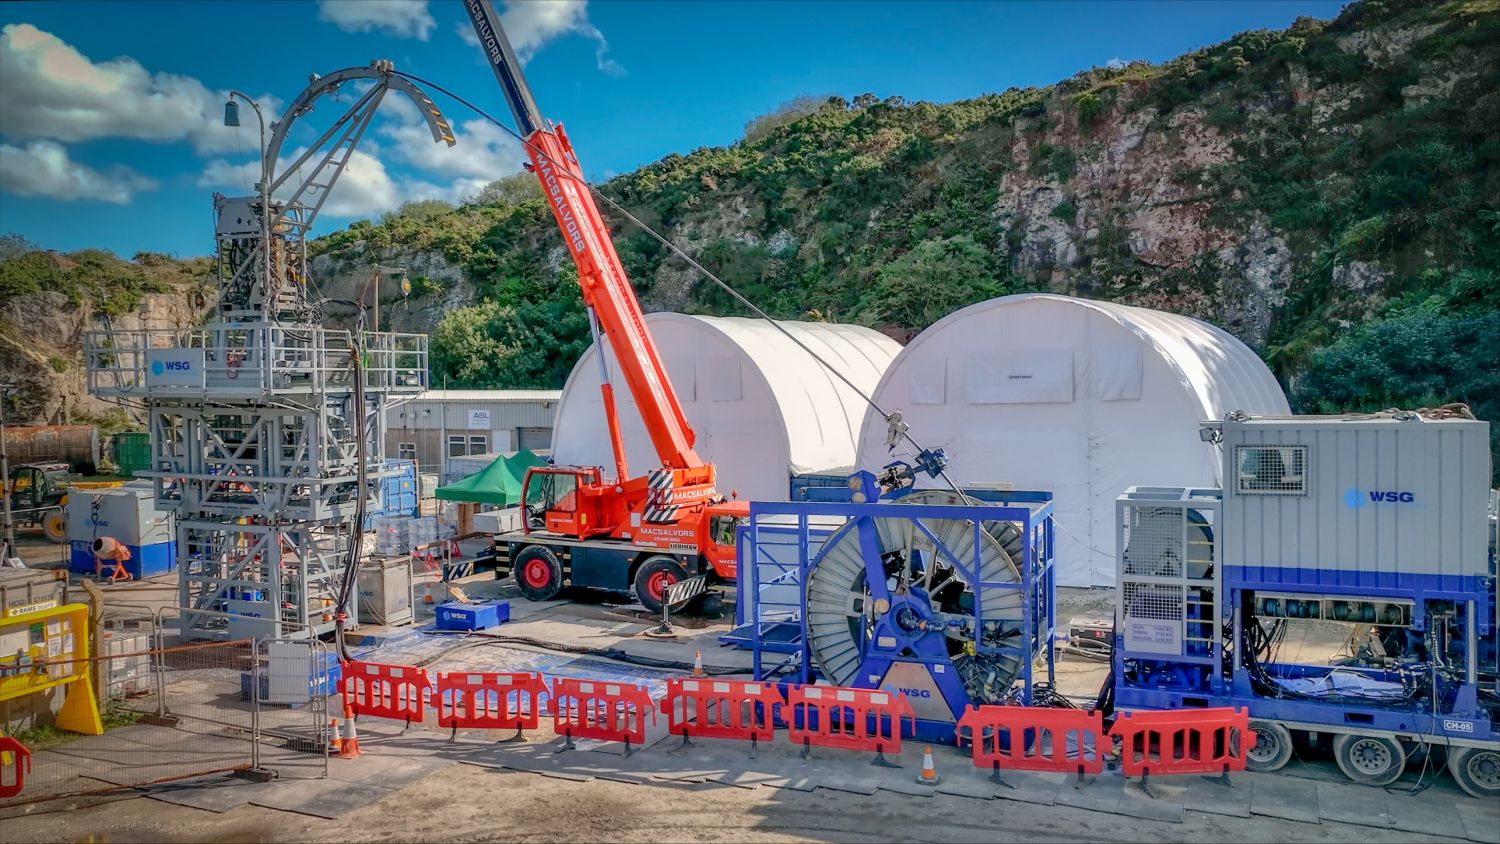 Nuclear Waste Services has conducted tests to seal boreholes at a disused quarry in Cornwall (Image courtesy of NWS)